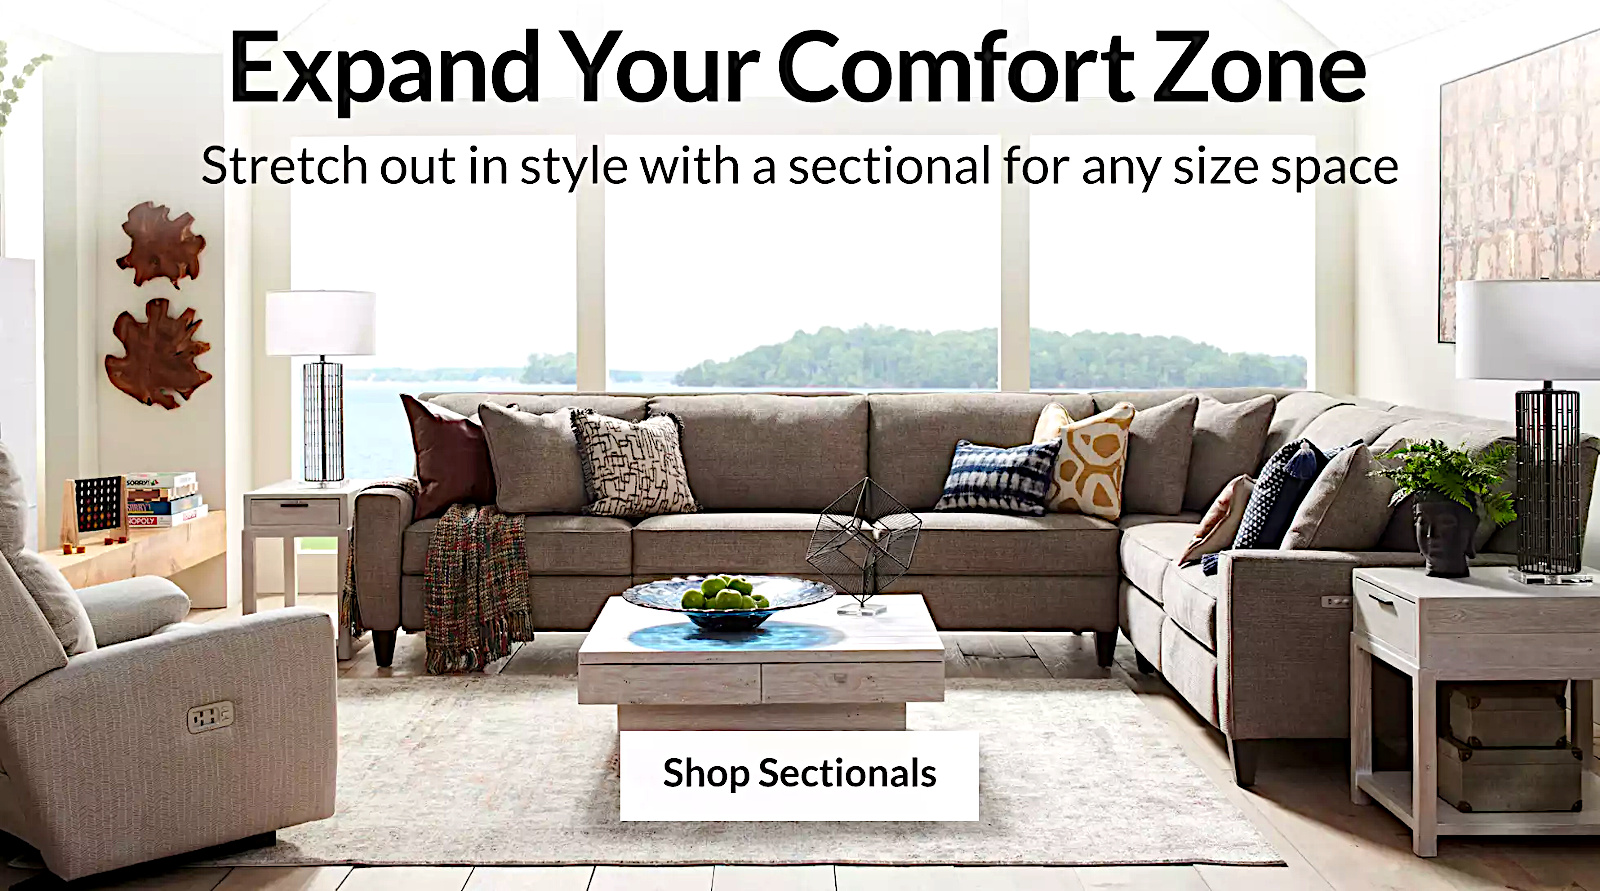 Expand your comfort zone special discount